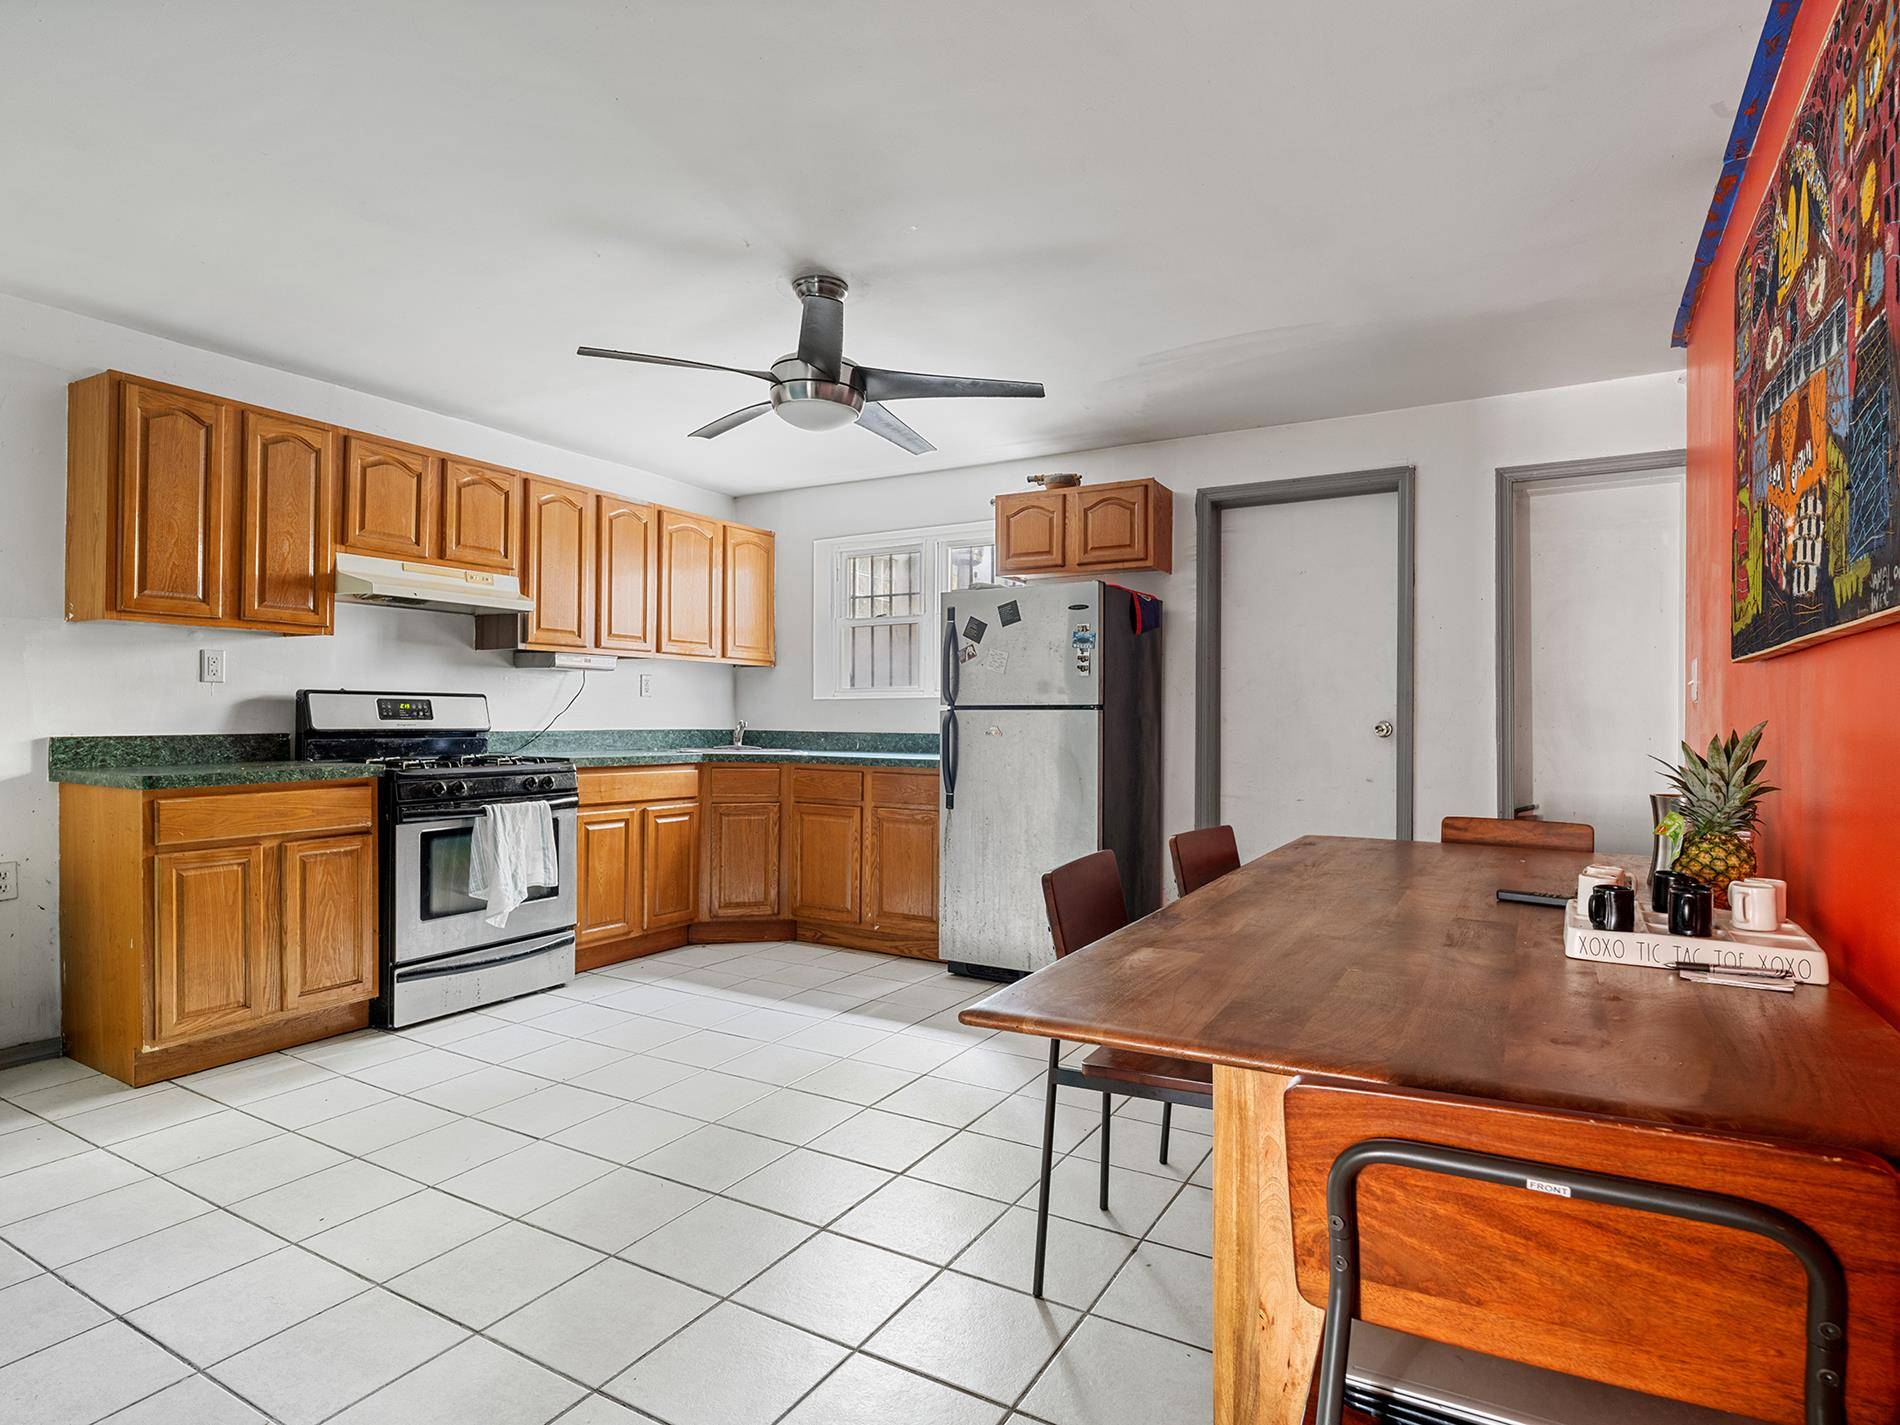 This stunning brownstone is located right at the start of Bushwick, one block away from the J train at Halsey Street.